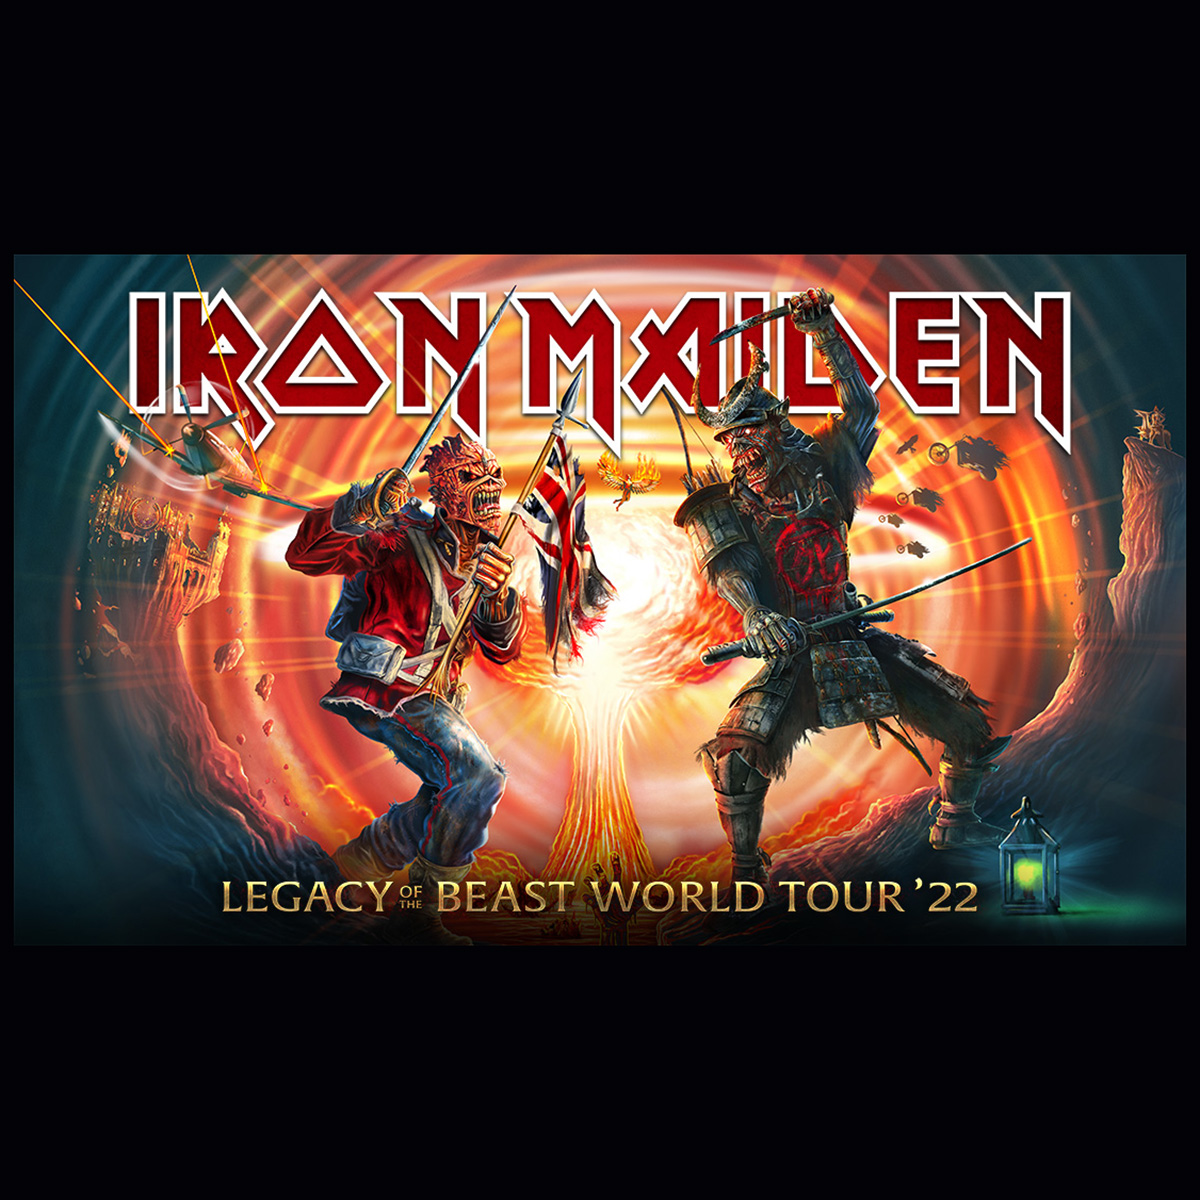 Iron Maiden announce Ontario dates for The Legacy Of The Beast World Tour On Sale December 10th.